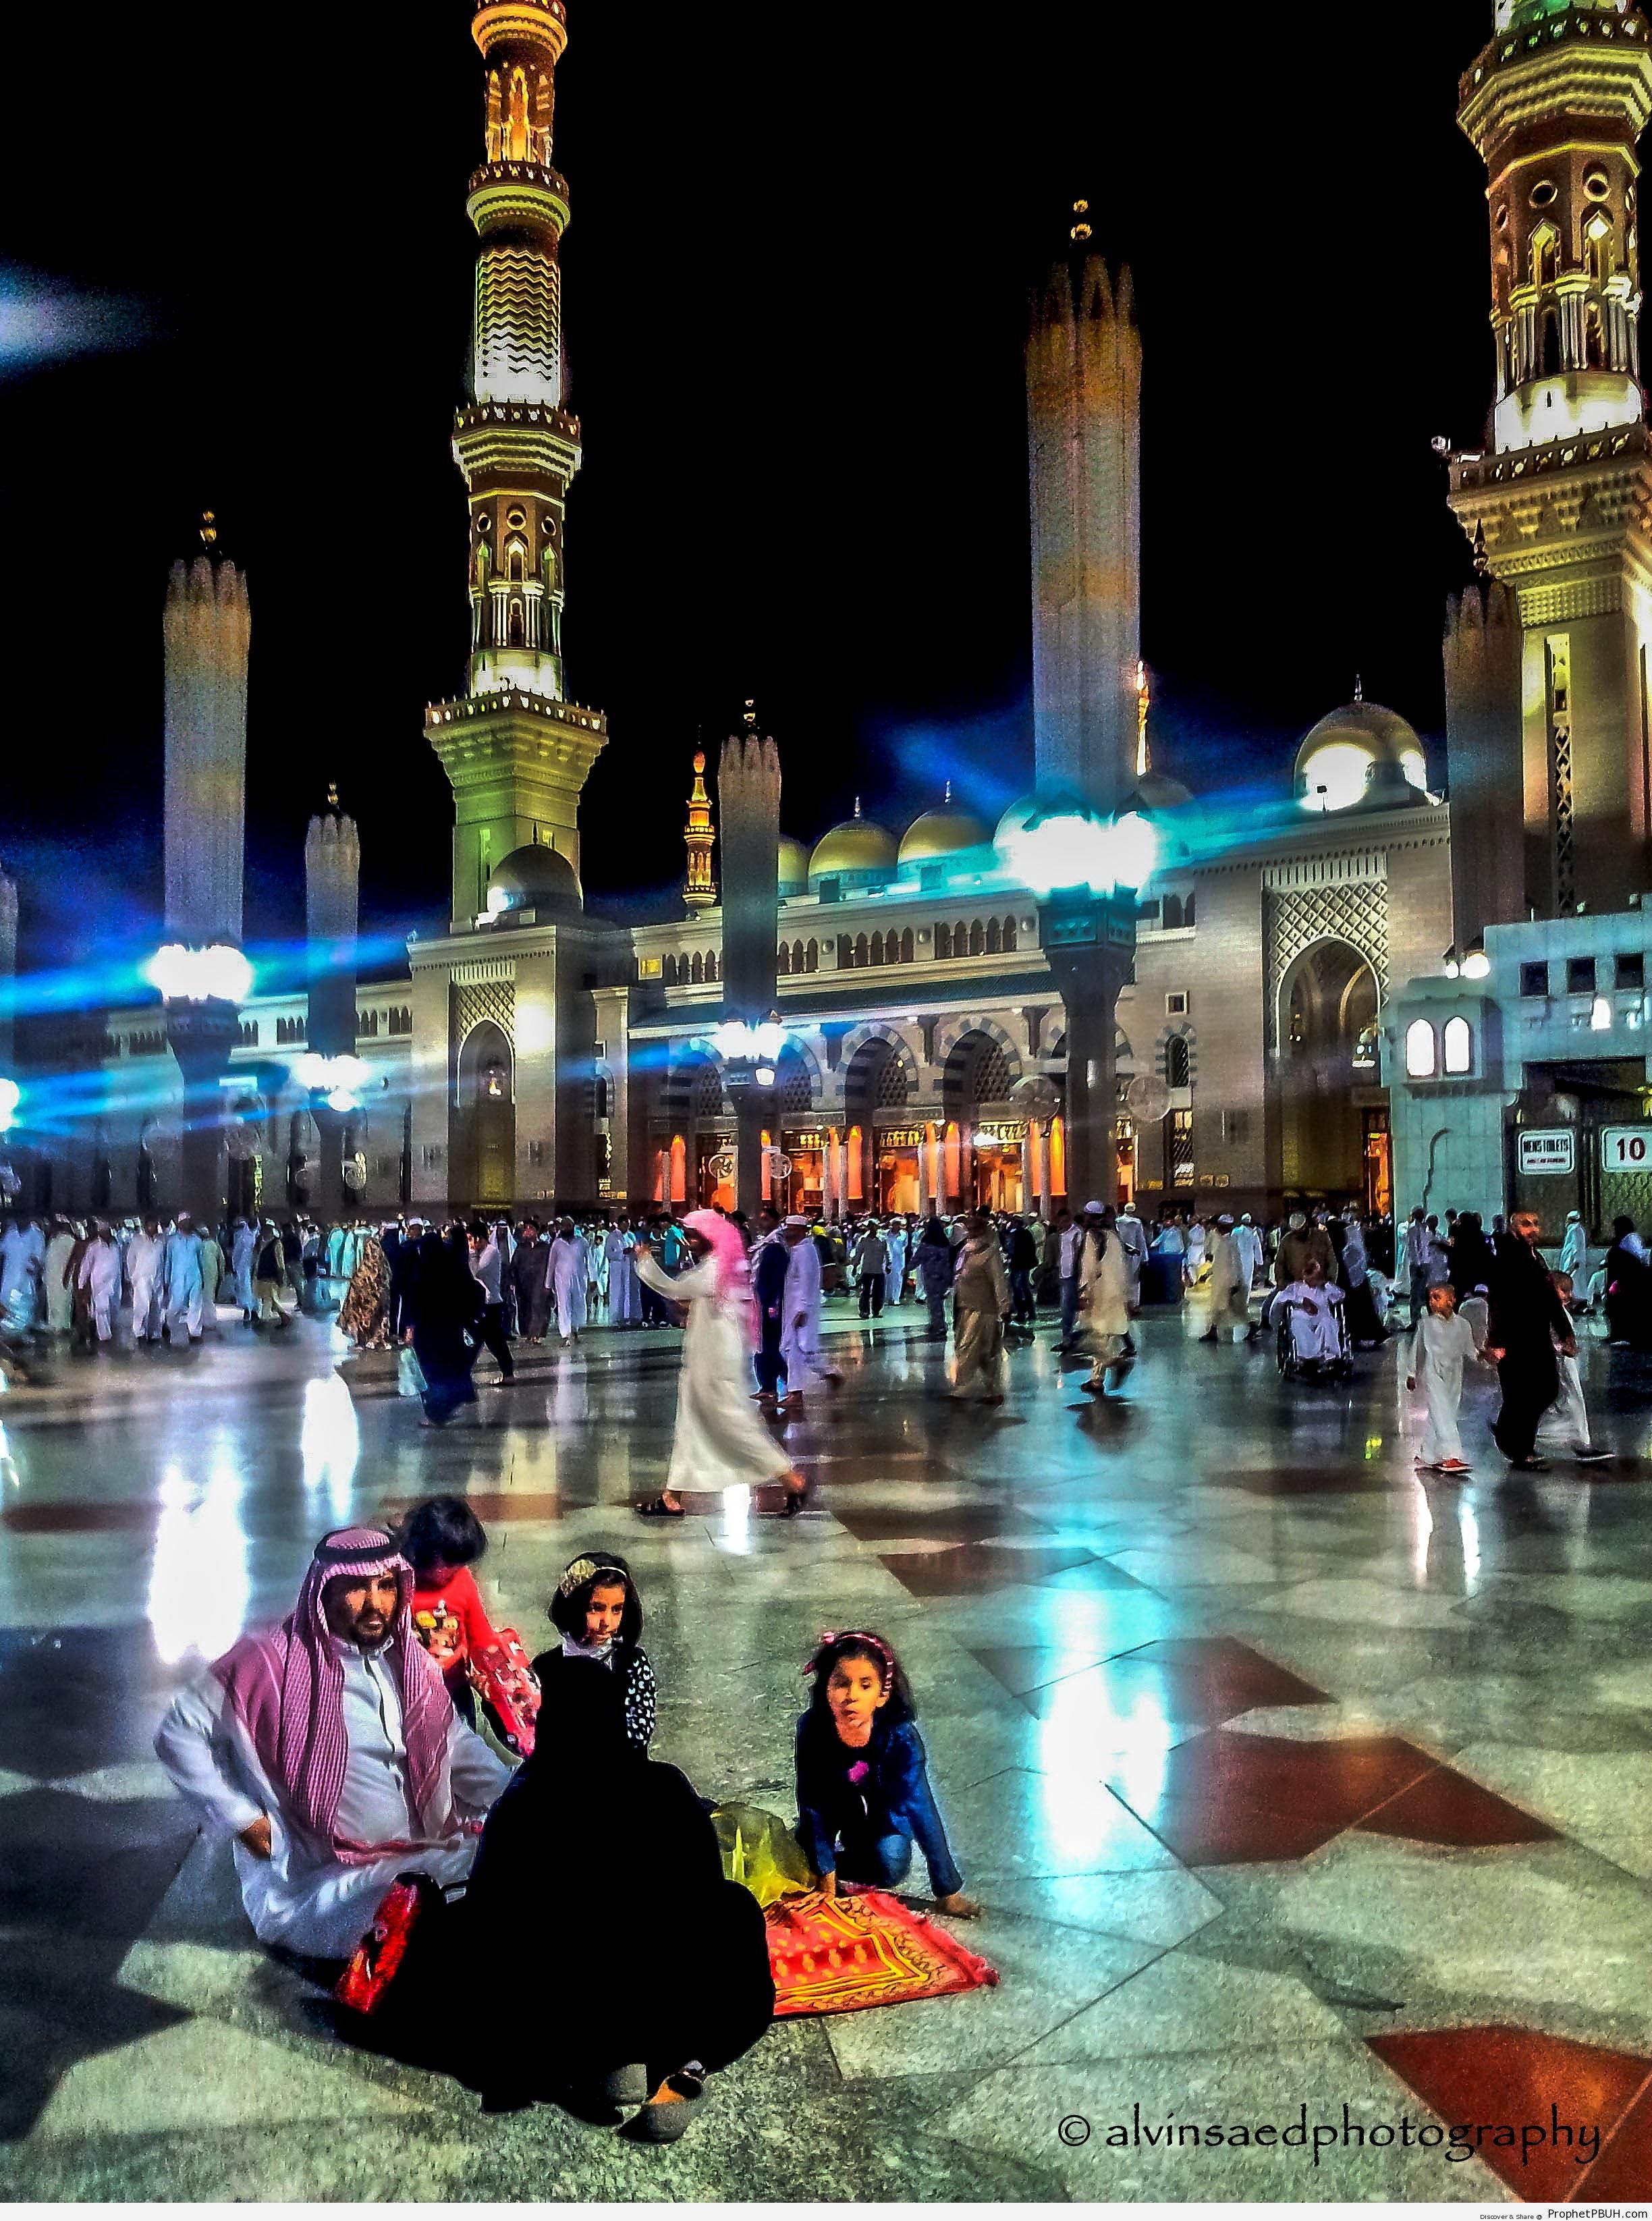 Family at al-Masjid an-Nabawi - Al-Masjid an-Nabawi (The Prophets Mosque) in Madinah, Saudi Arabia -Picture